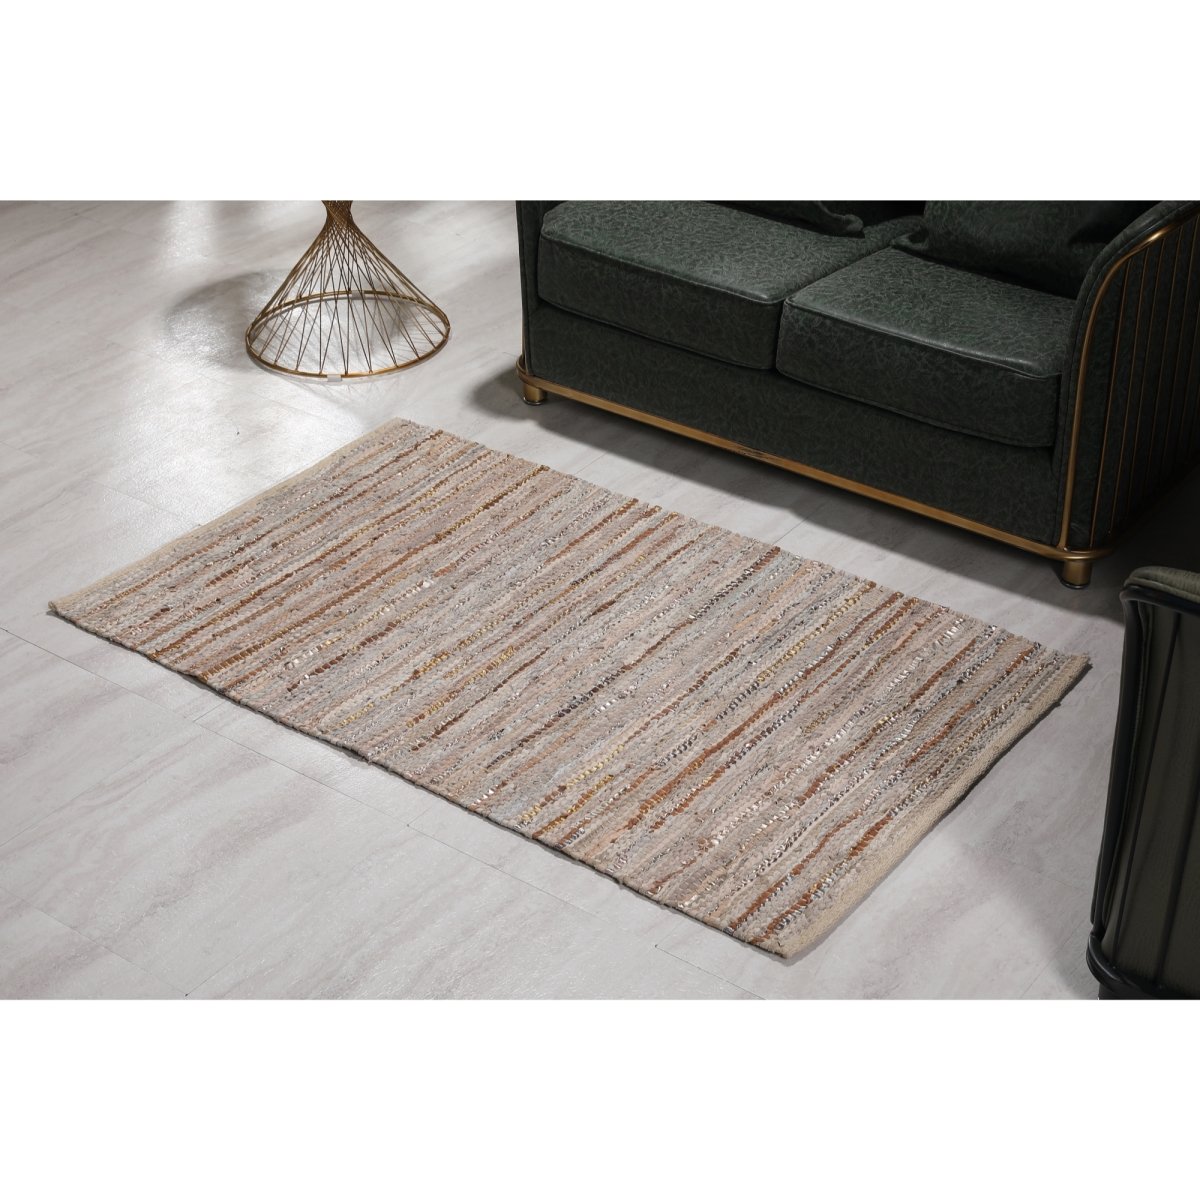 Whtxr641-m 3 X 5 Ft. Handwoven Leather & Cotton Rug With Metallic Leather, Beige